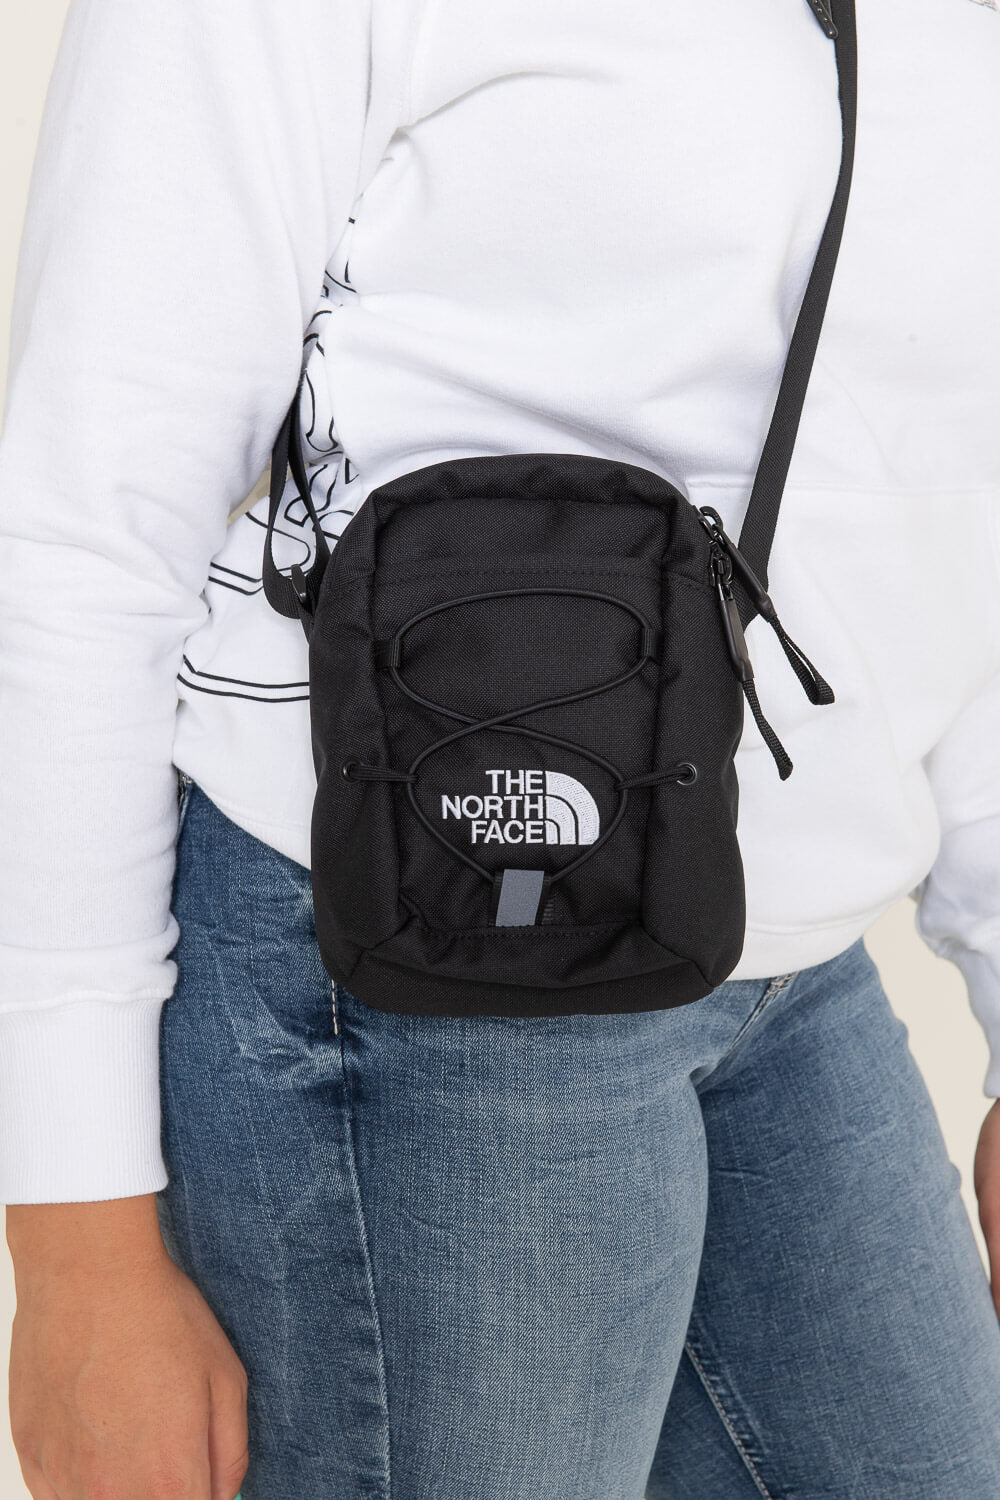 The North Face Messenger Bag Carry On